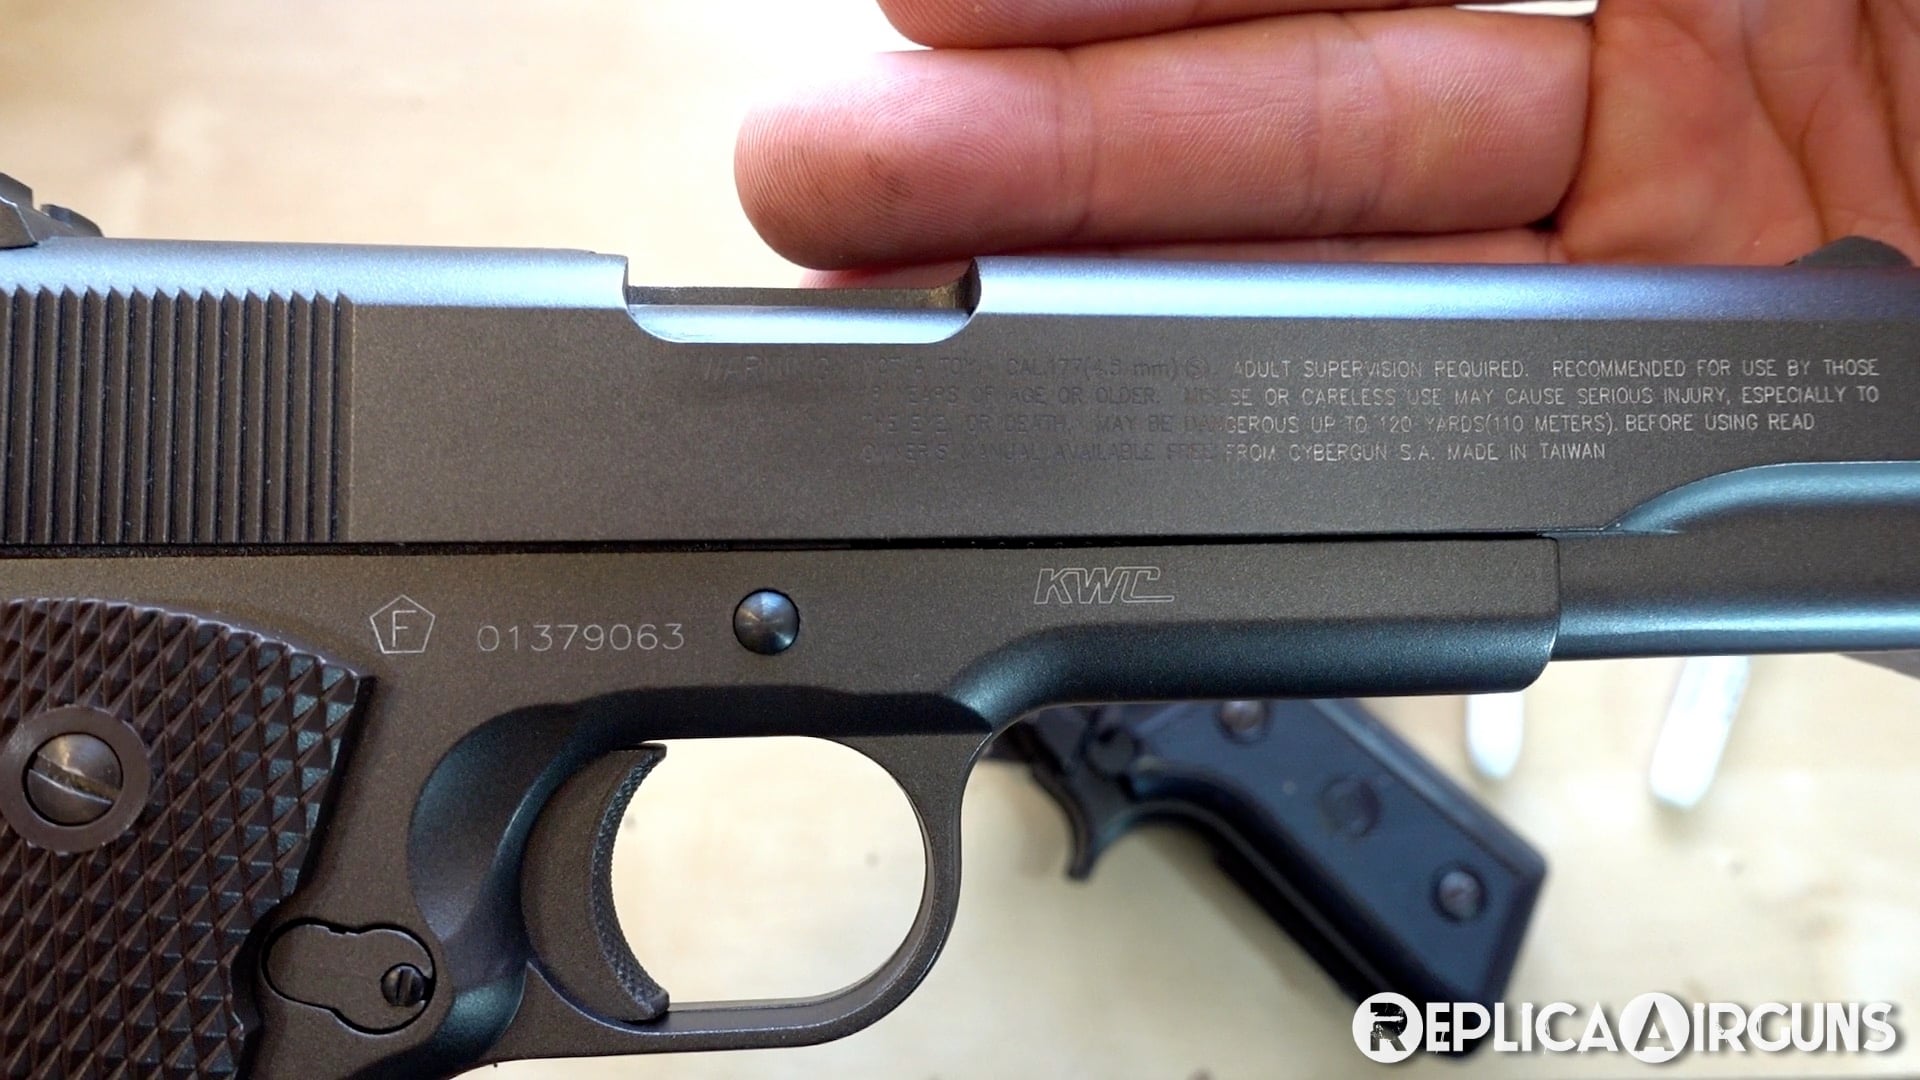 How to Get Rid of That Ugly White Writing on Your Airgun